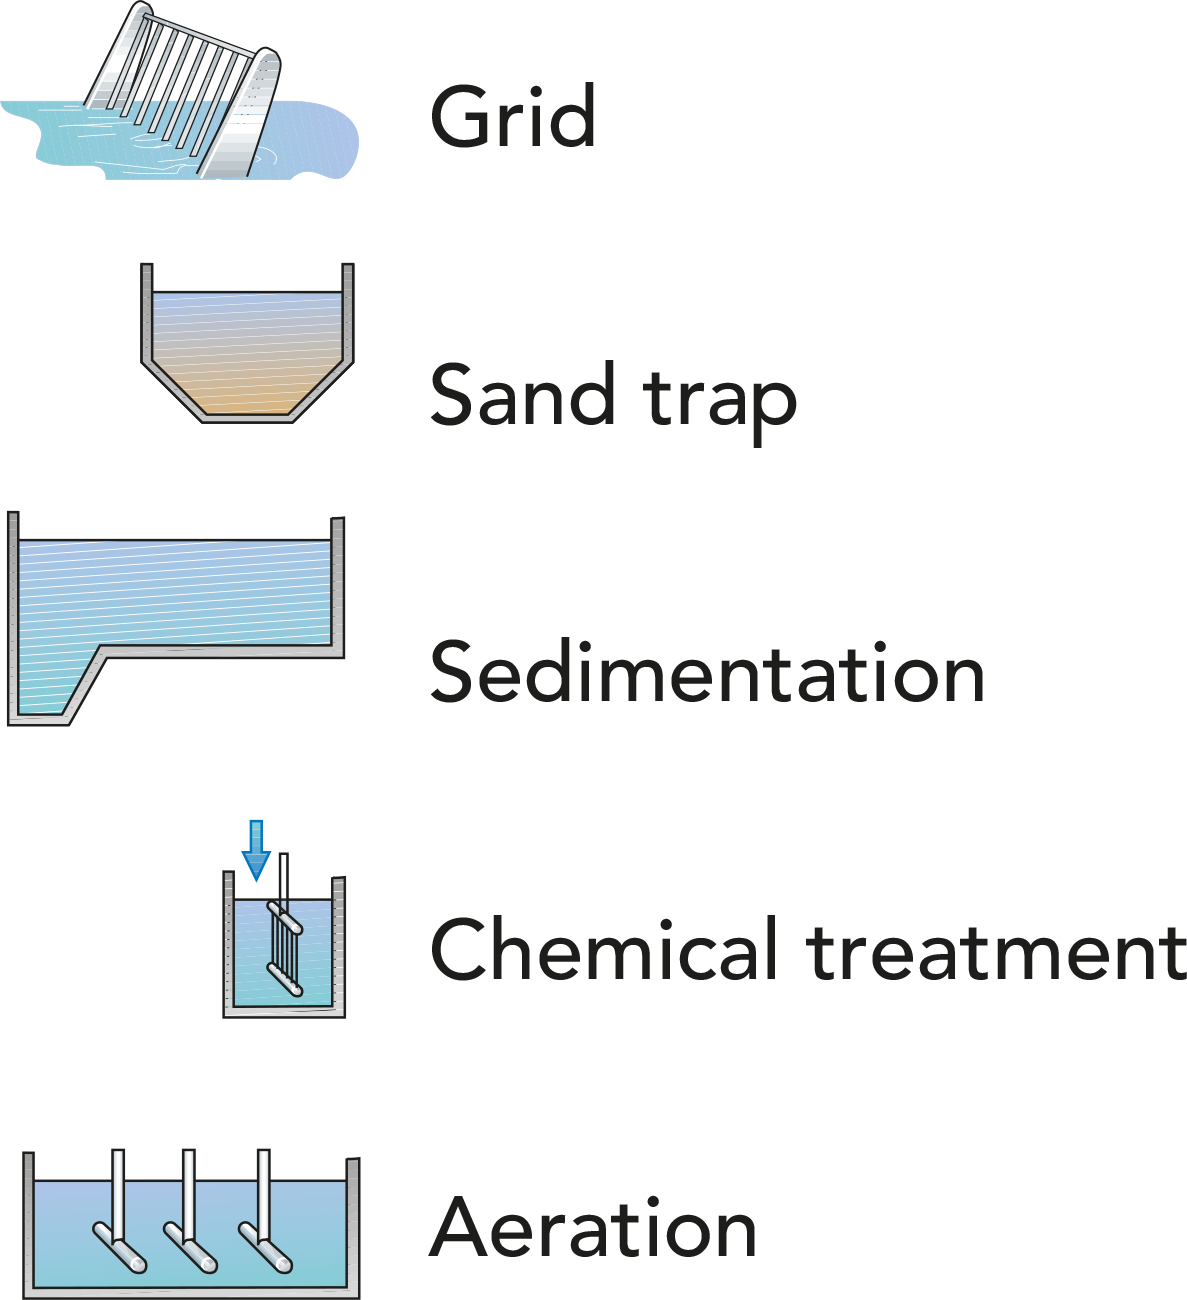 Dairy Waste Treatment Flow Chart